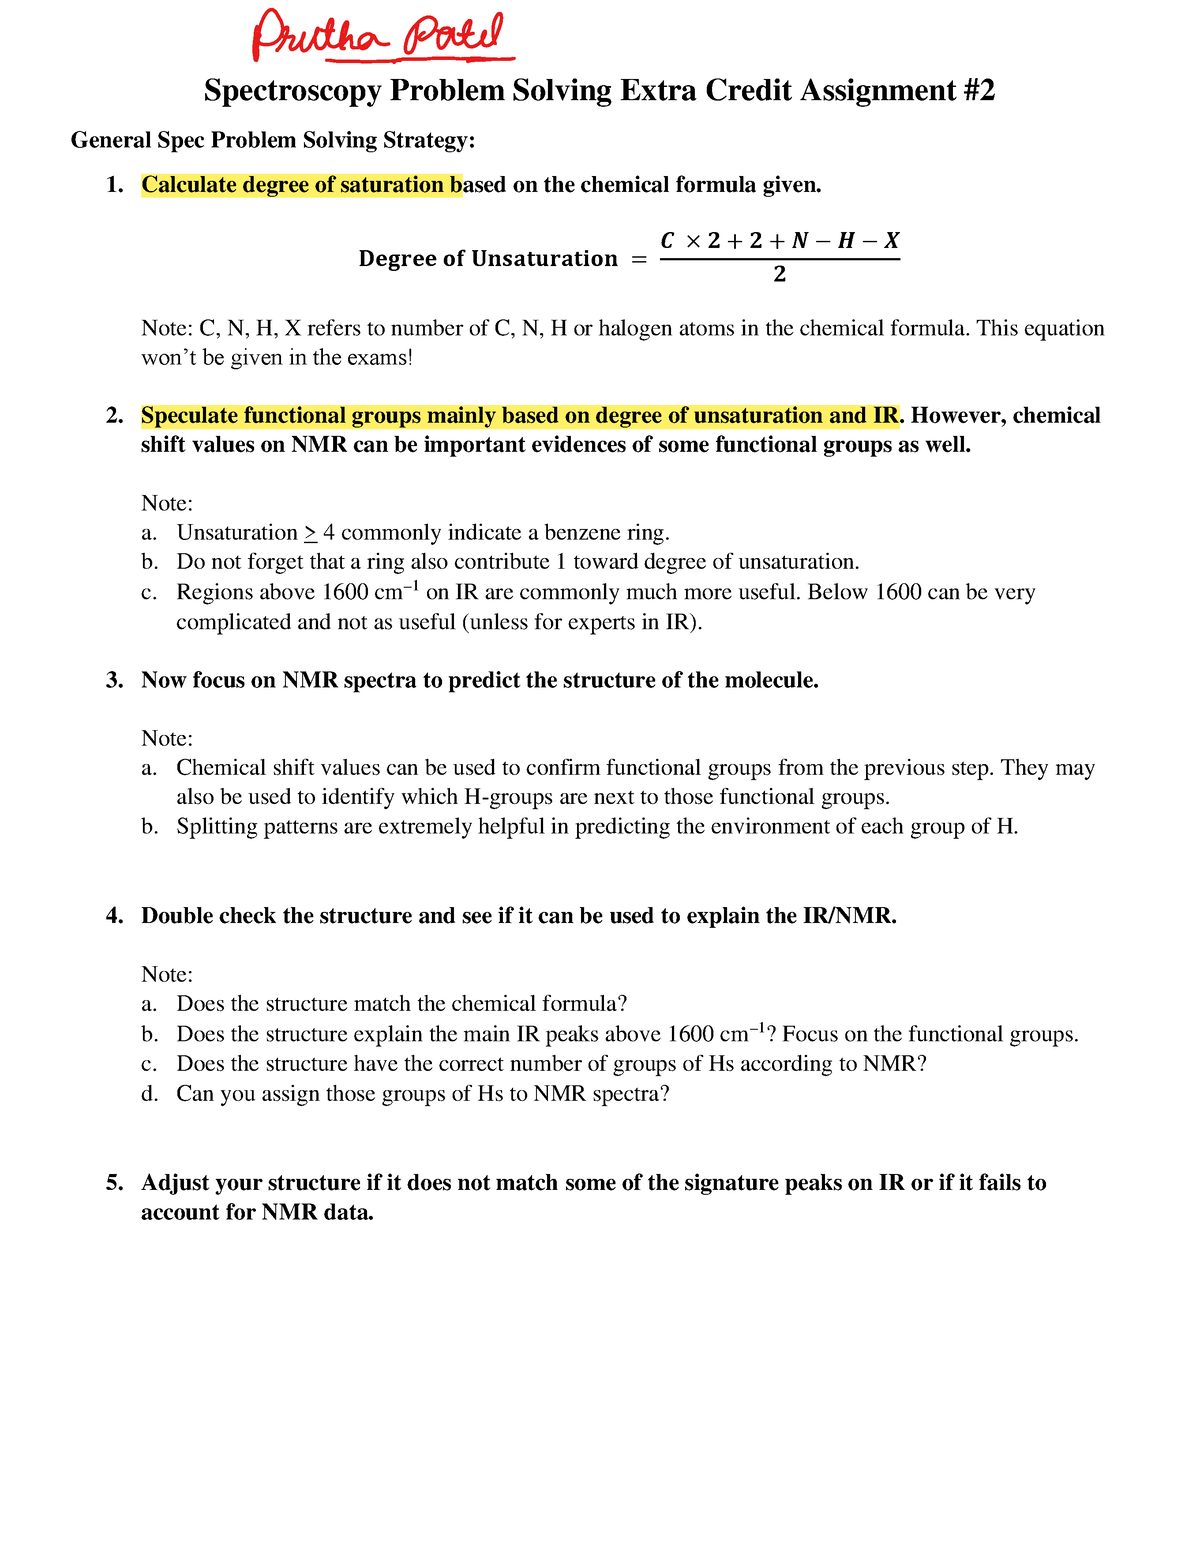 spectroscopy problem solving extra credit assignment #2